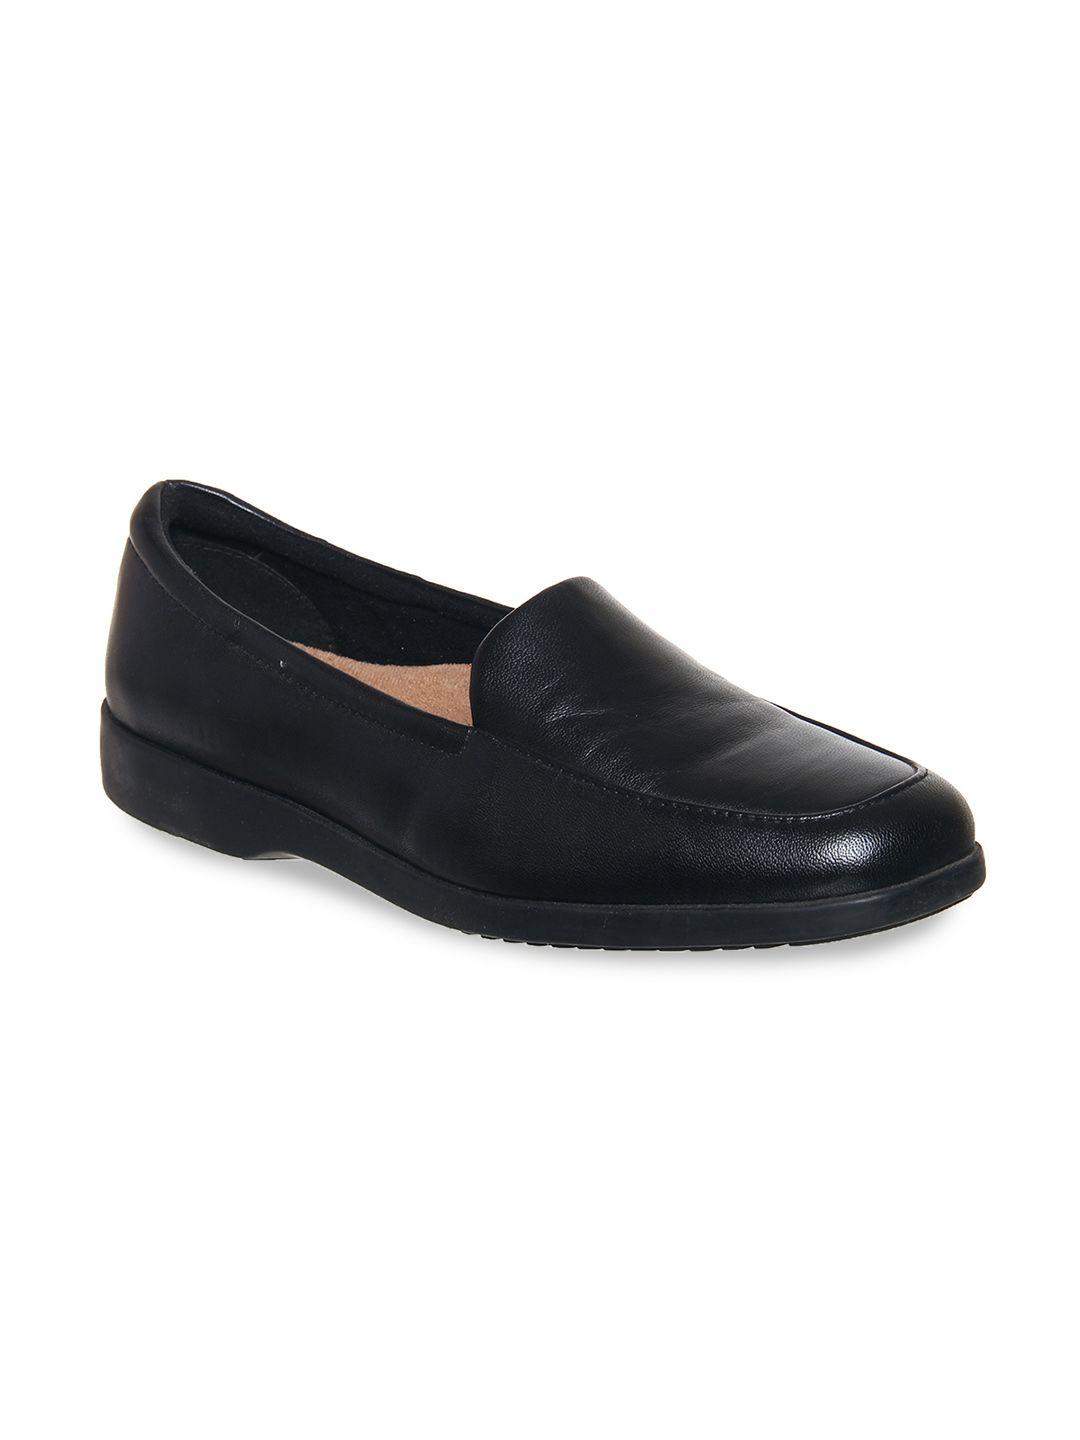 clarks black solid leather formal leather slip on shoes